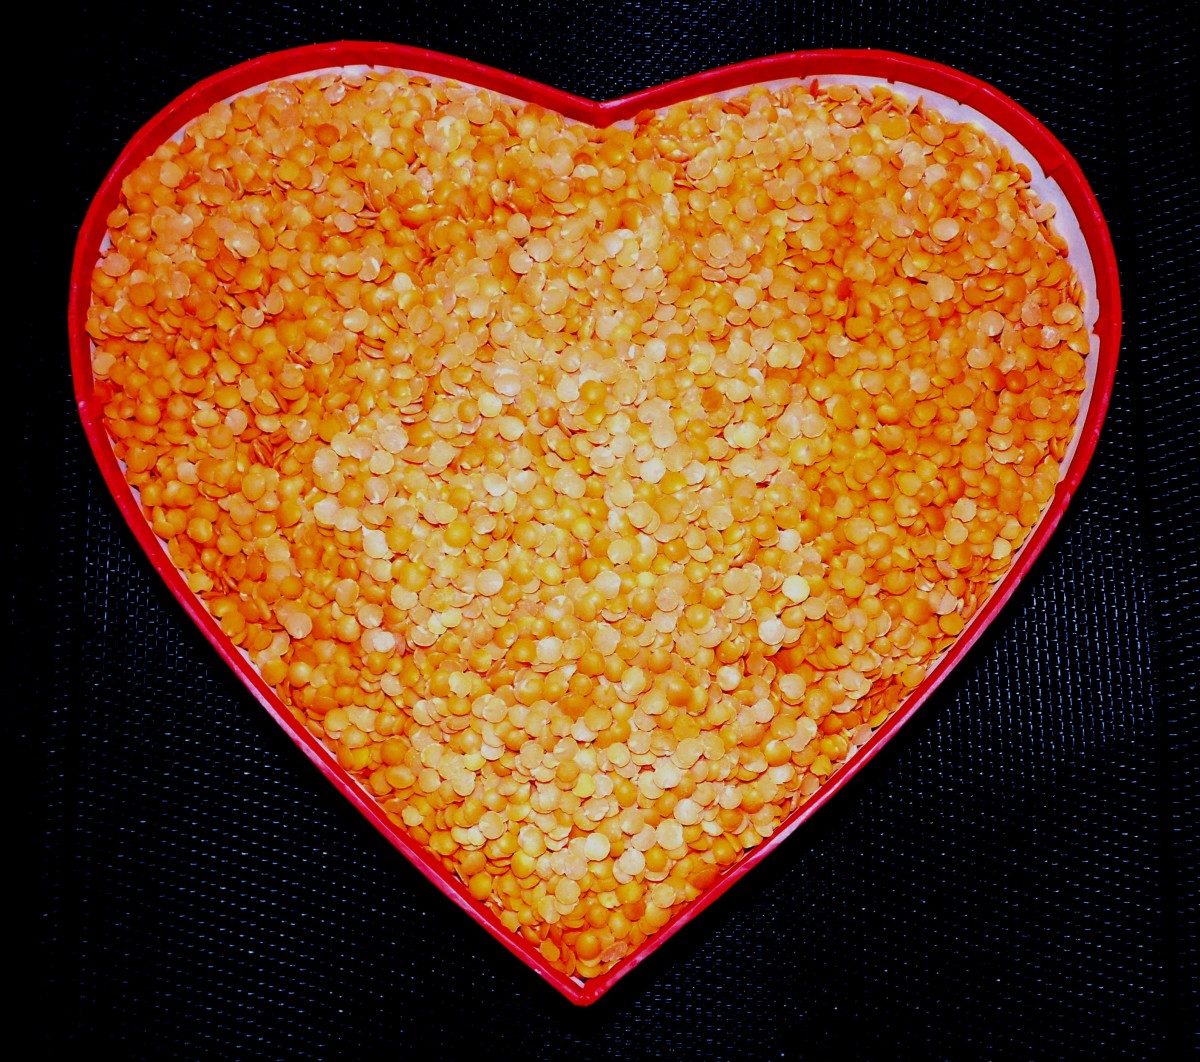 Red lentils: what's not to love?